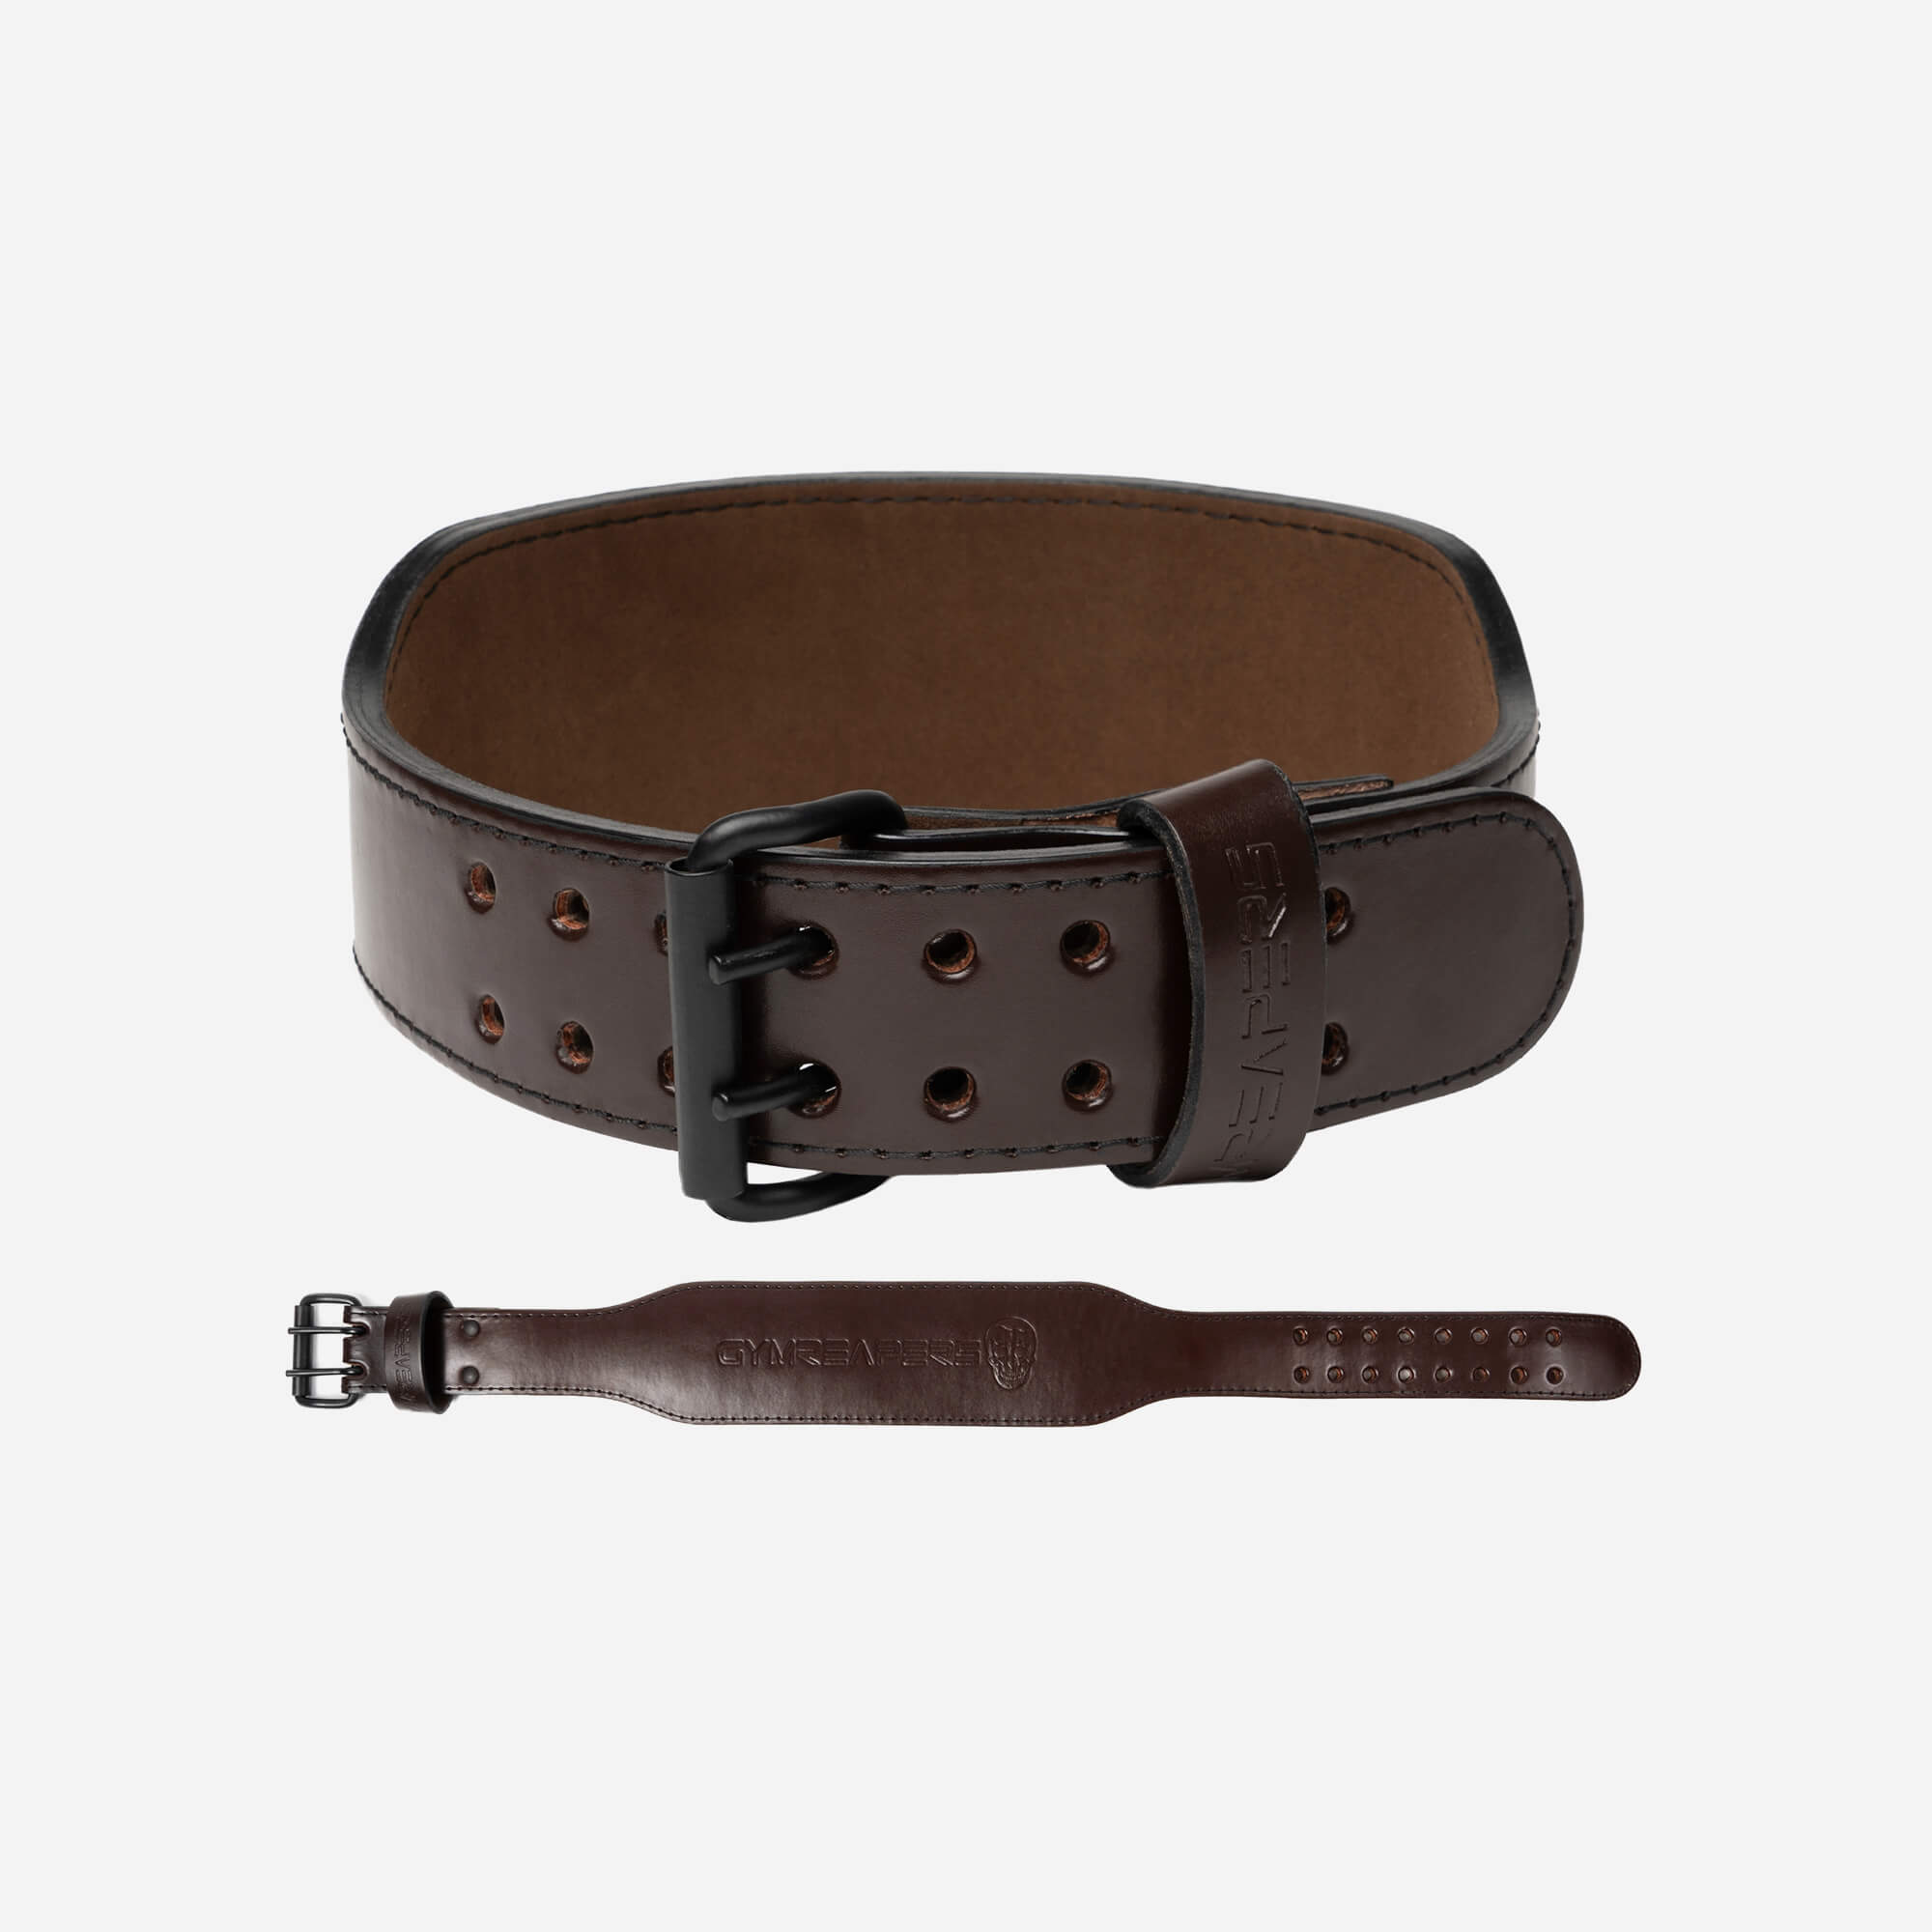 7mm Leather Weight Lifting Belt - Brown